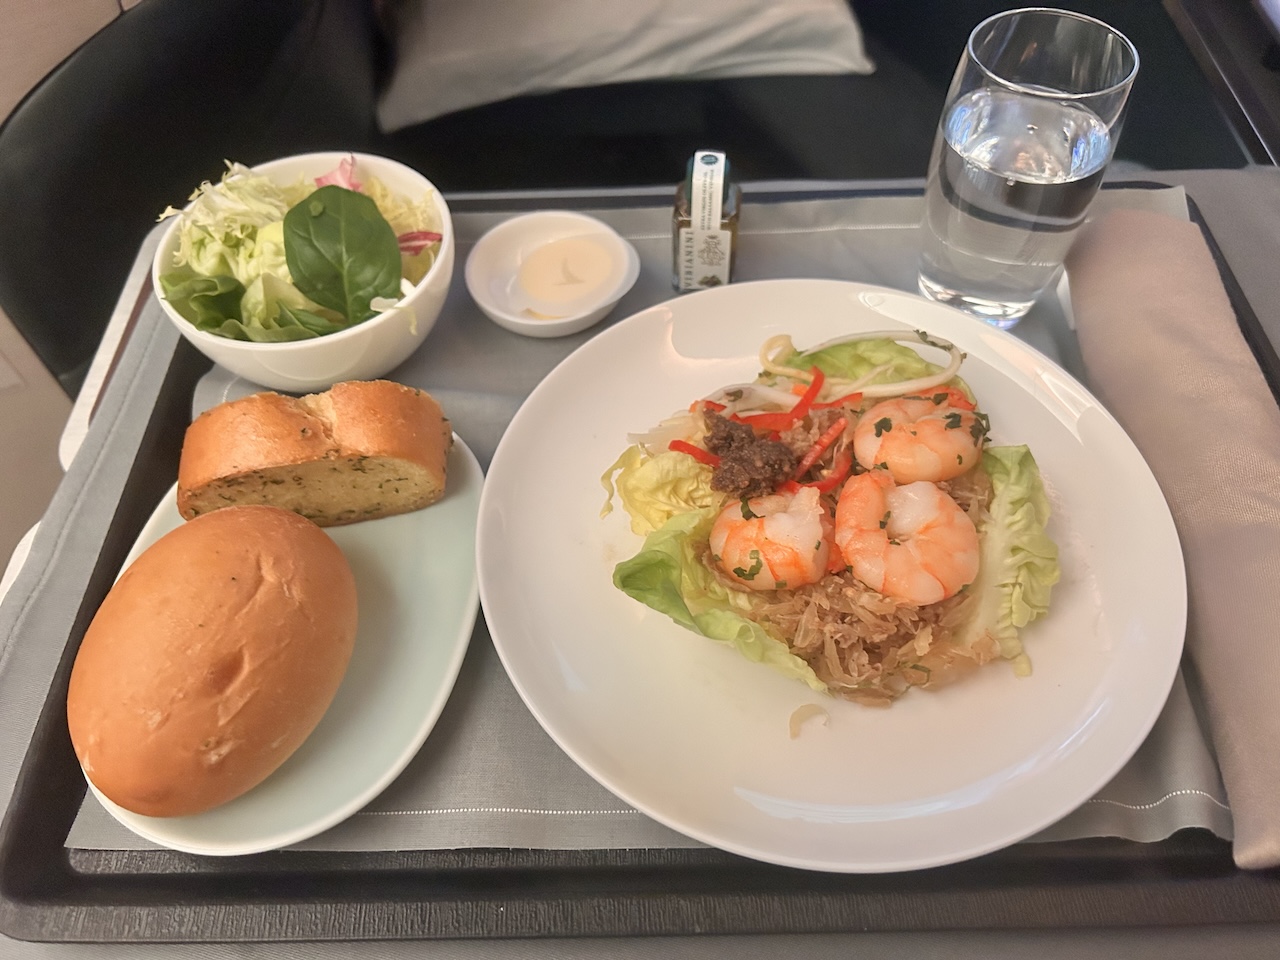 Nick Walton enjoys Cathay Pacific's long-haul business class on a short hop from Seoul to Hong Kong.